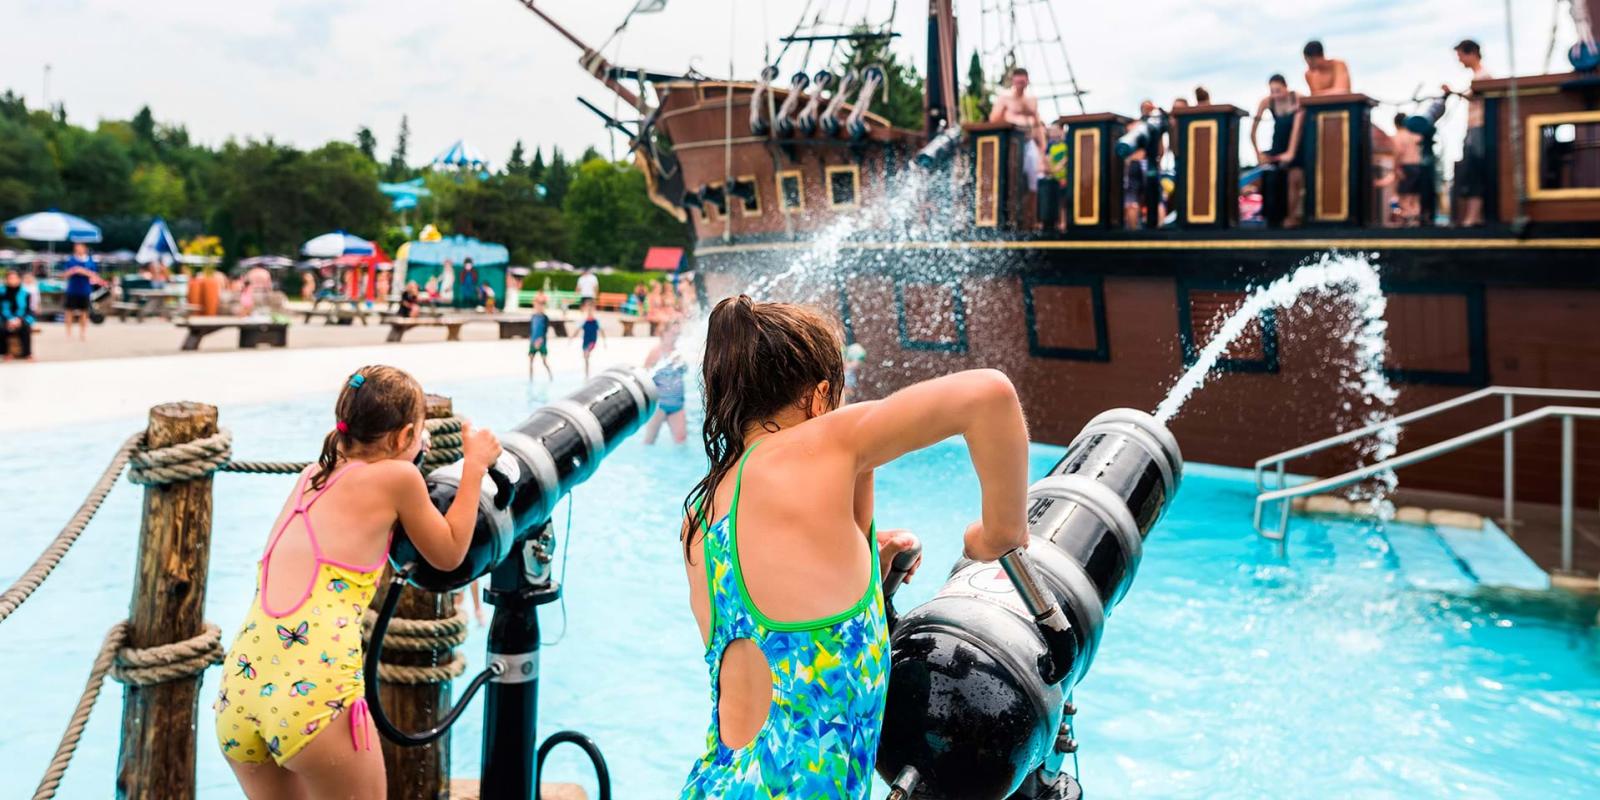 Children have fun in the water games and the pirate lair at Village Vacances Valcartier.